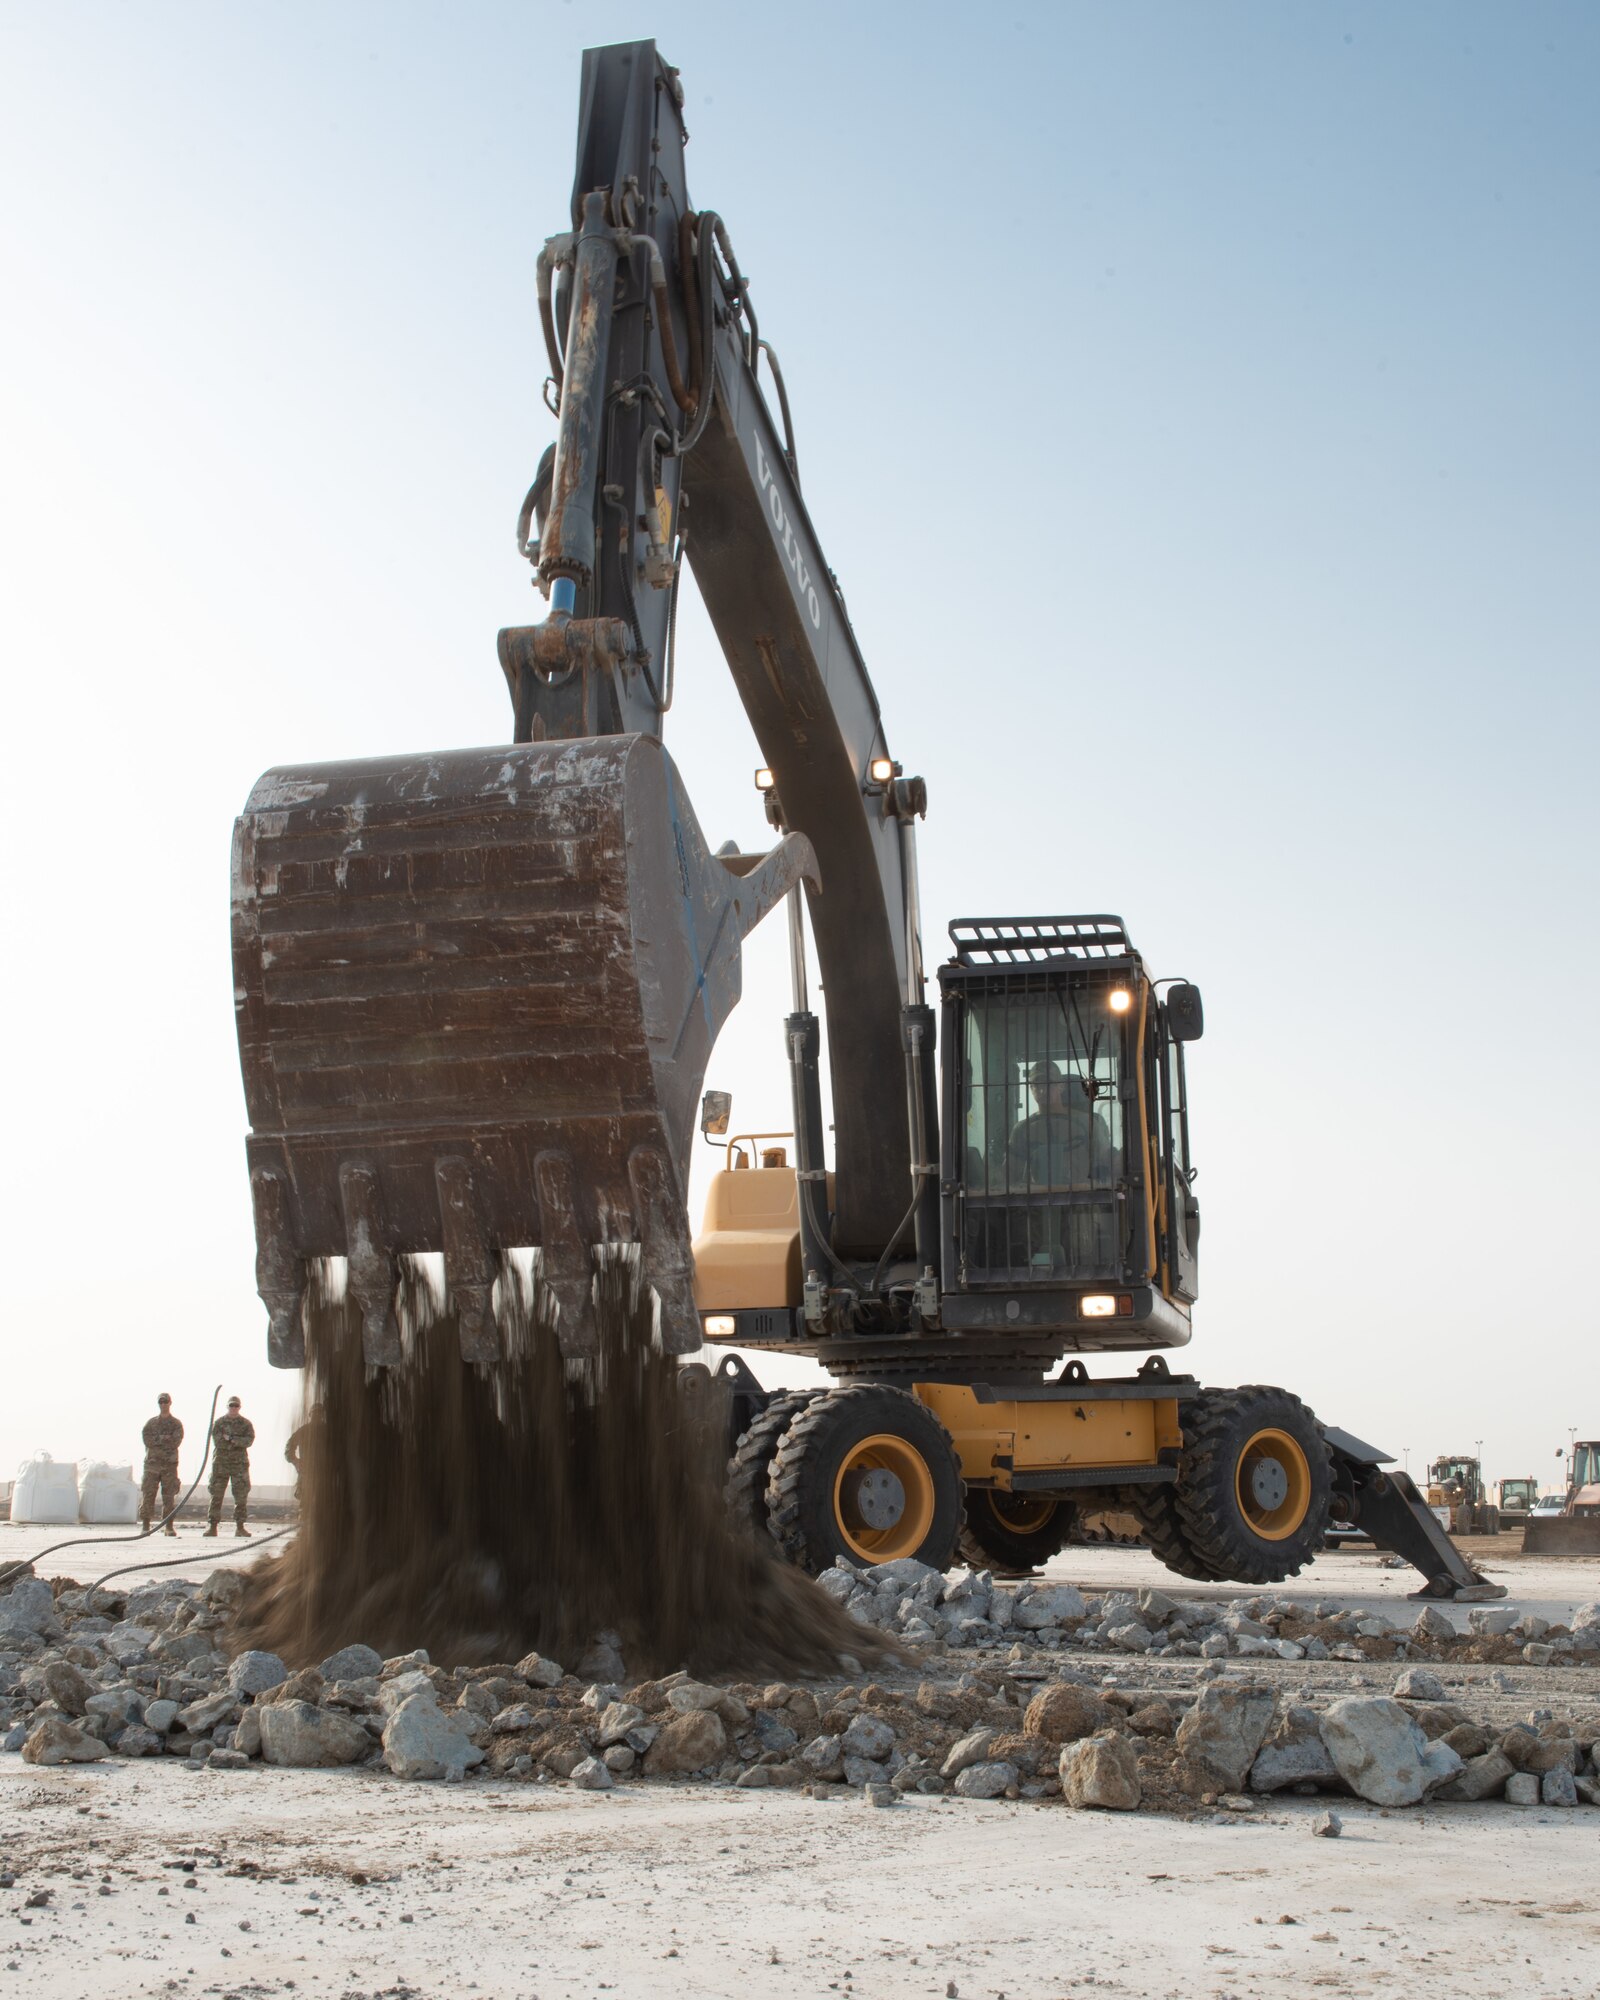 Senior Airman David Smith, 380th Expeditionary Civil Engineer Squadron heavy machine operator, operates an excavator to collect and lift concrete during a rapid airfield damage repair exercise July 26, 2019, at Al Dhafra Air Base, United Arab Emirates. Removing the concrete allows the team to replace the damaged area with new fast-curing concrete to get the airfield operational within hours. (U.S. Air Force photo by Staff Sgt. Chris Thornbury)